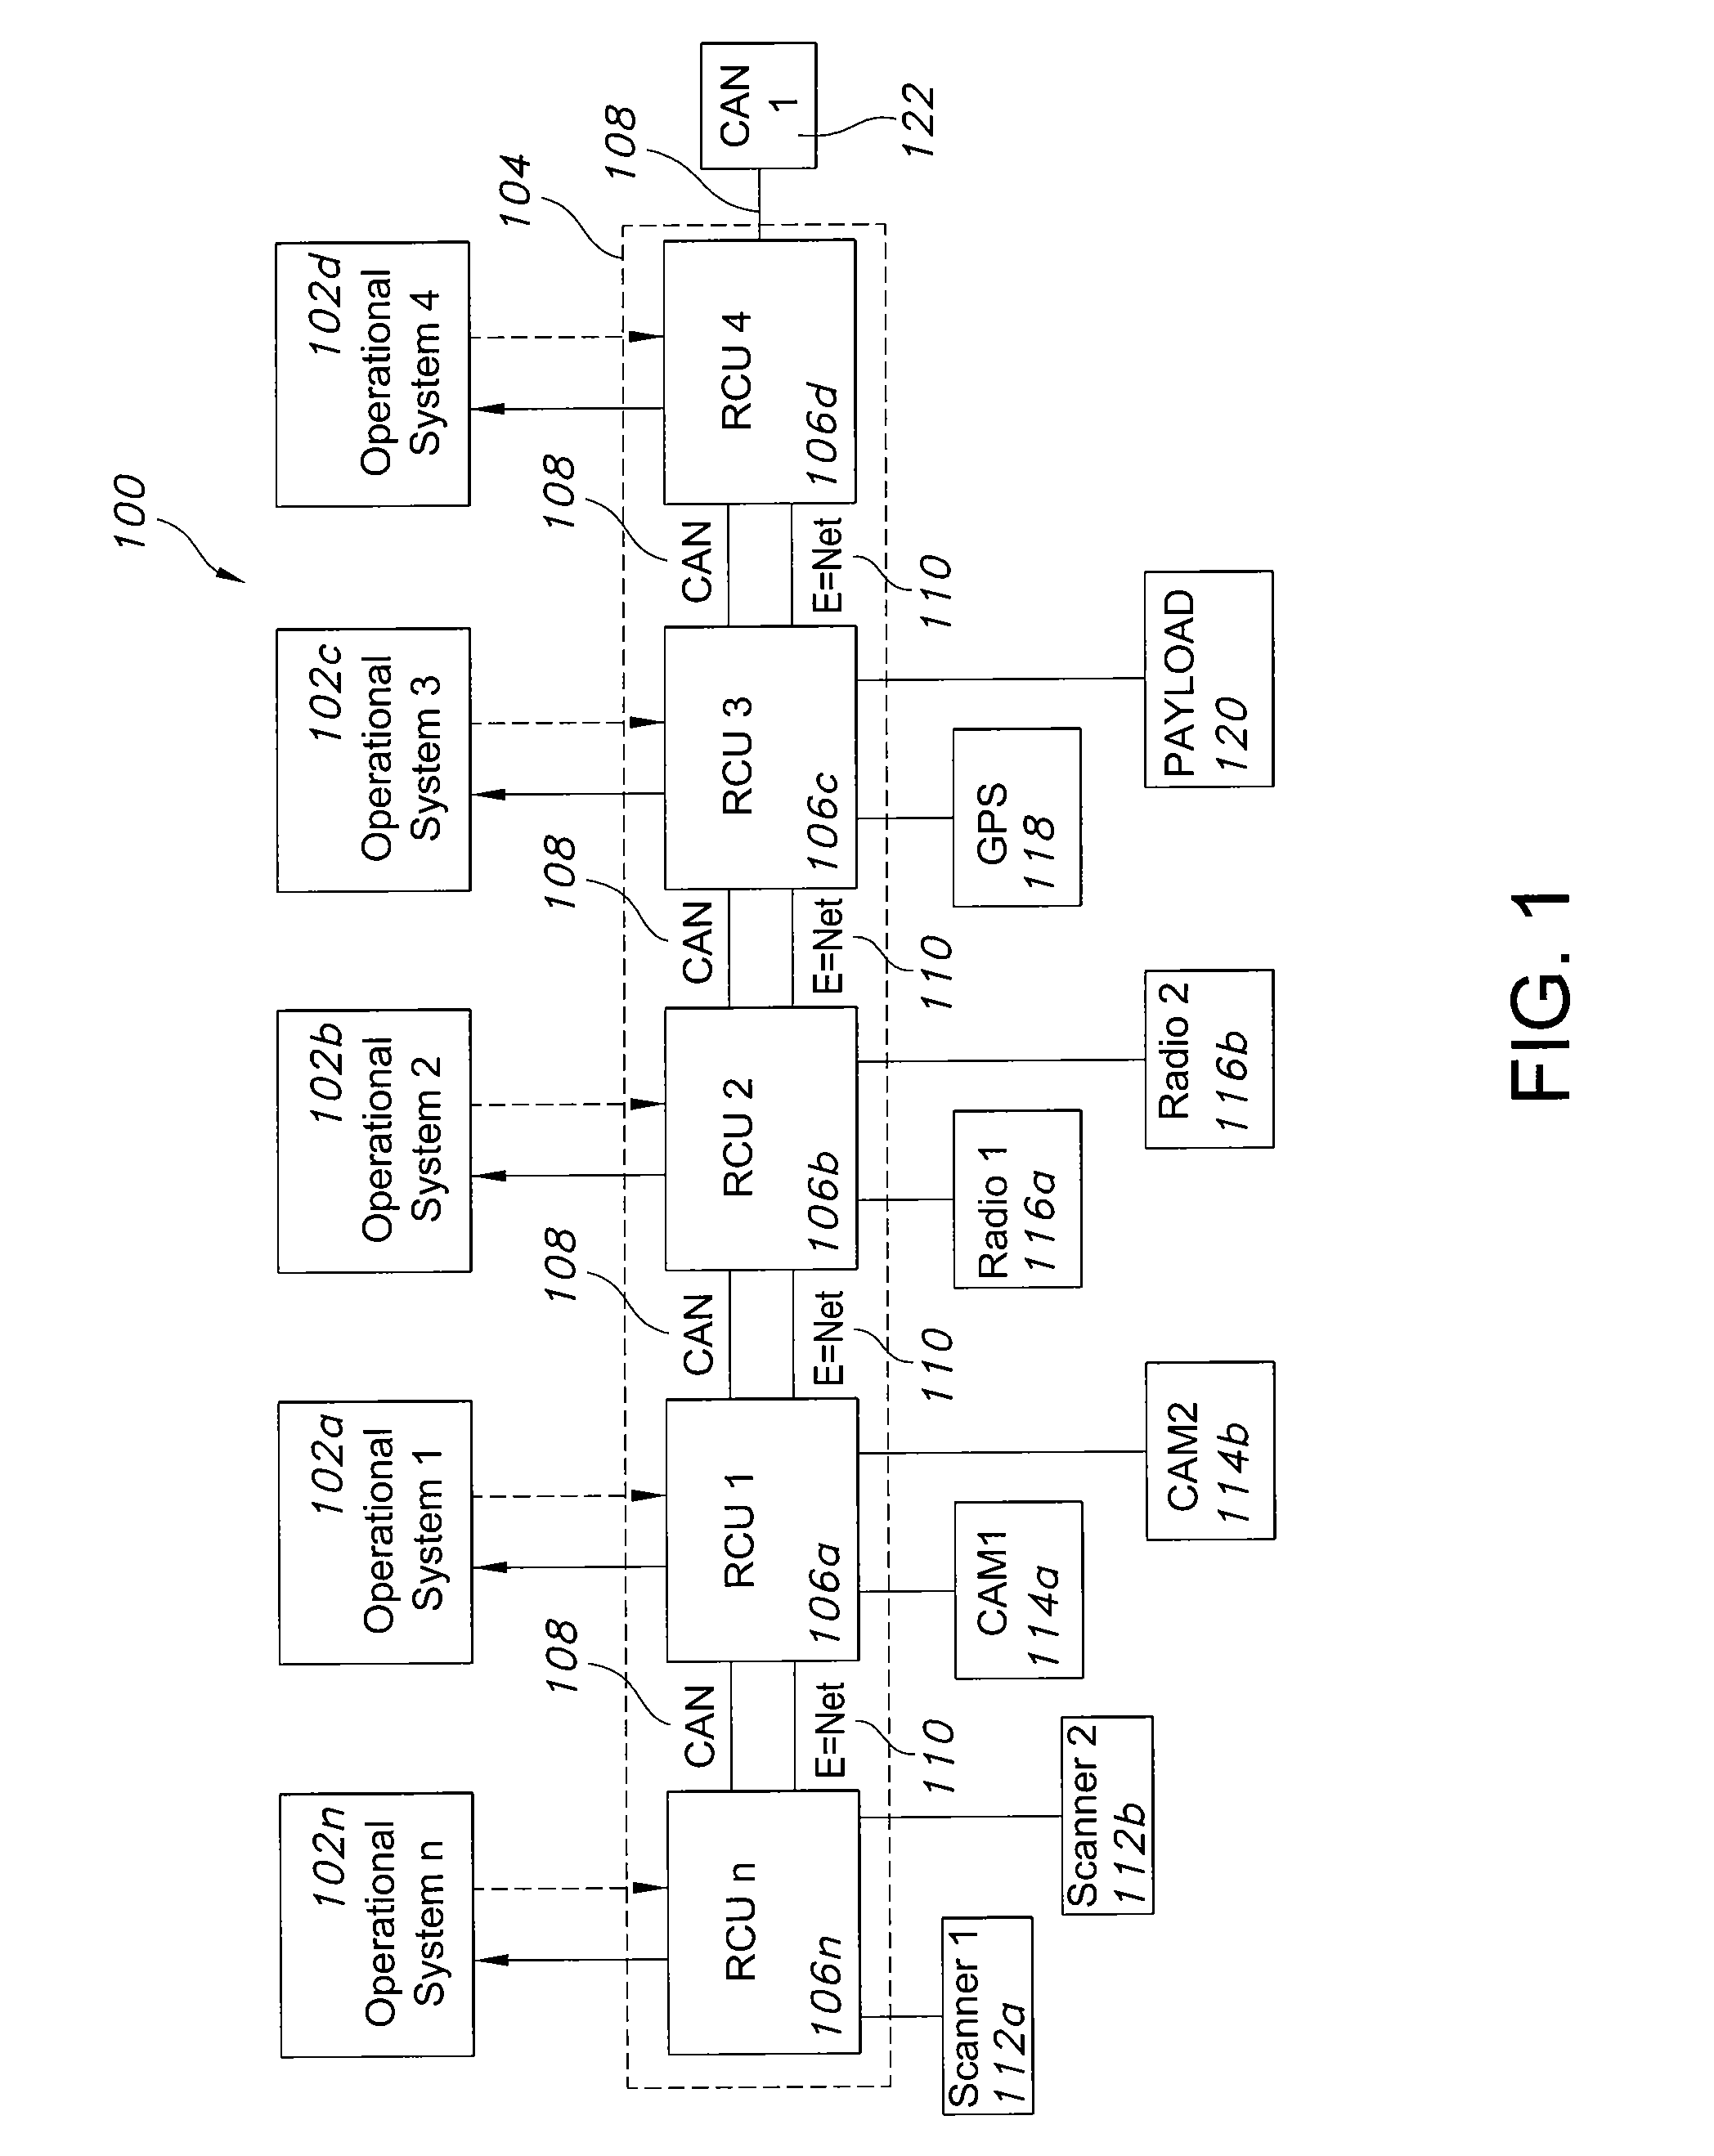 Systems and methods for obstacle avoidance